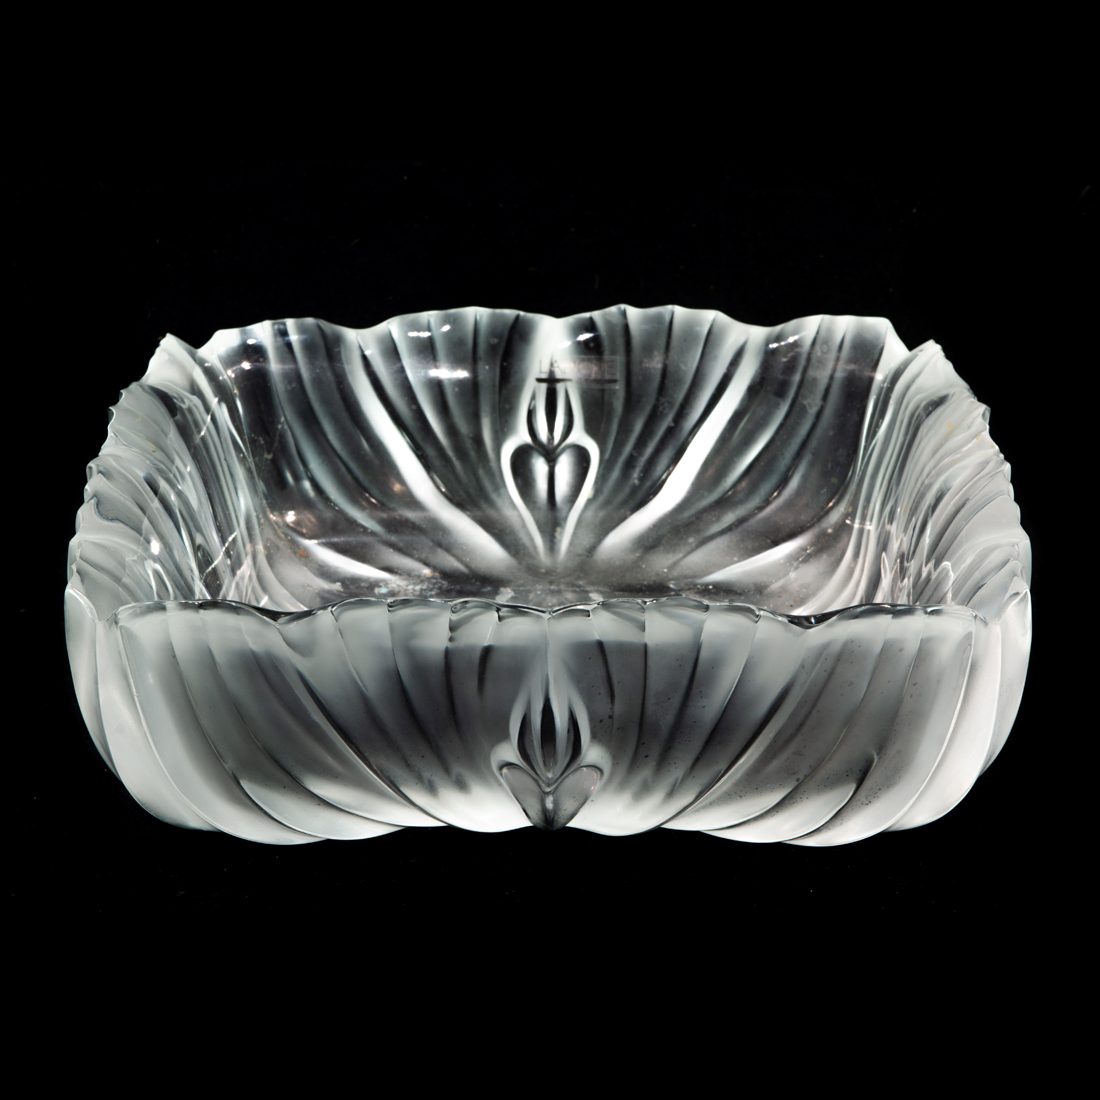 A LALIQUE FROSTED AND CLEAR GLASS VICTORIA